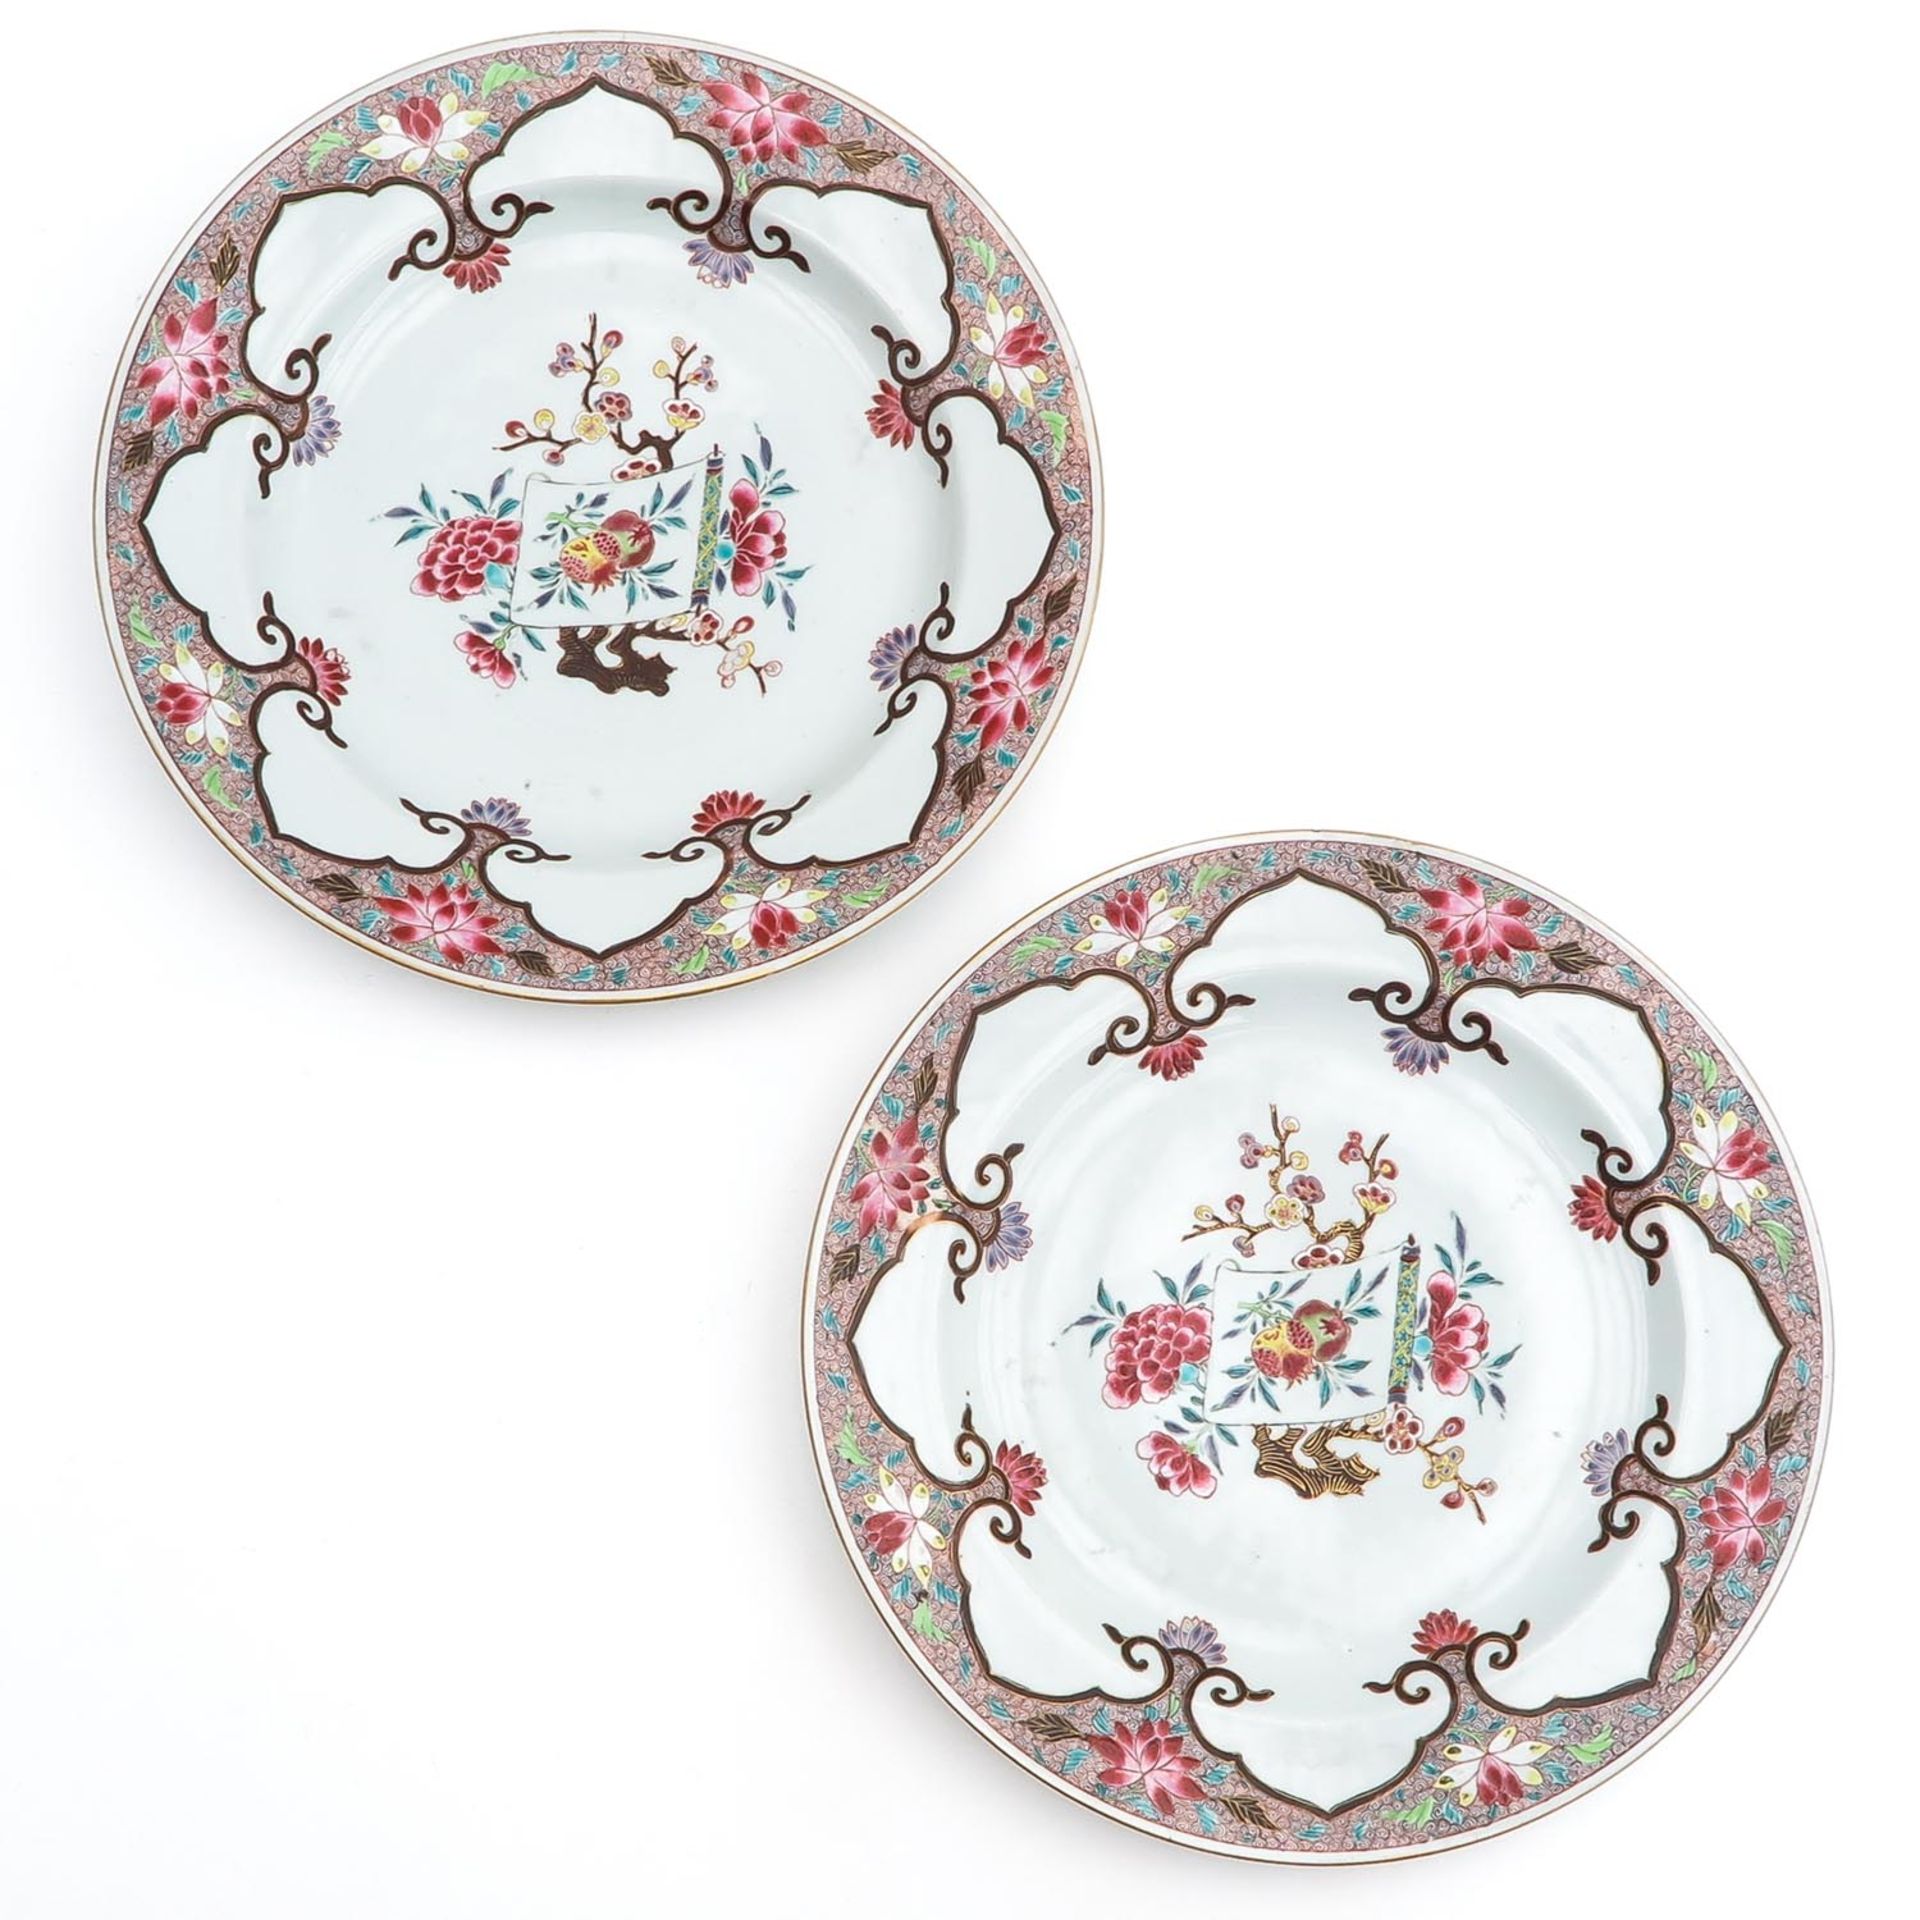 A Pair of Famille Rose Chargers